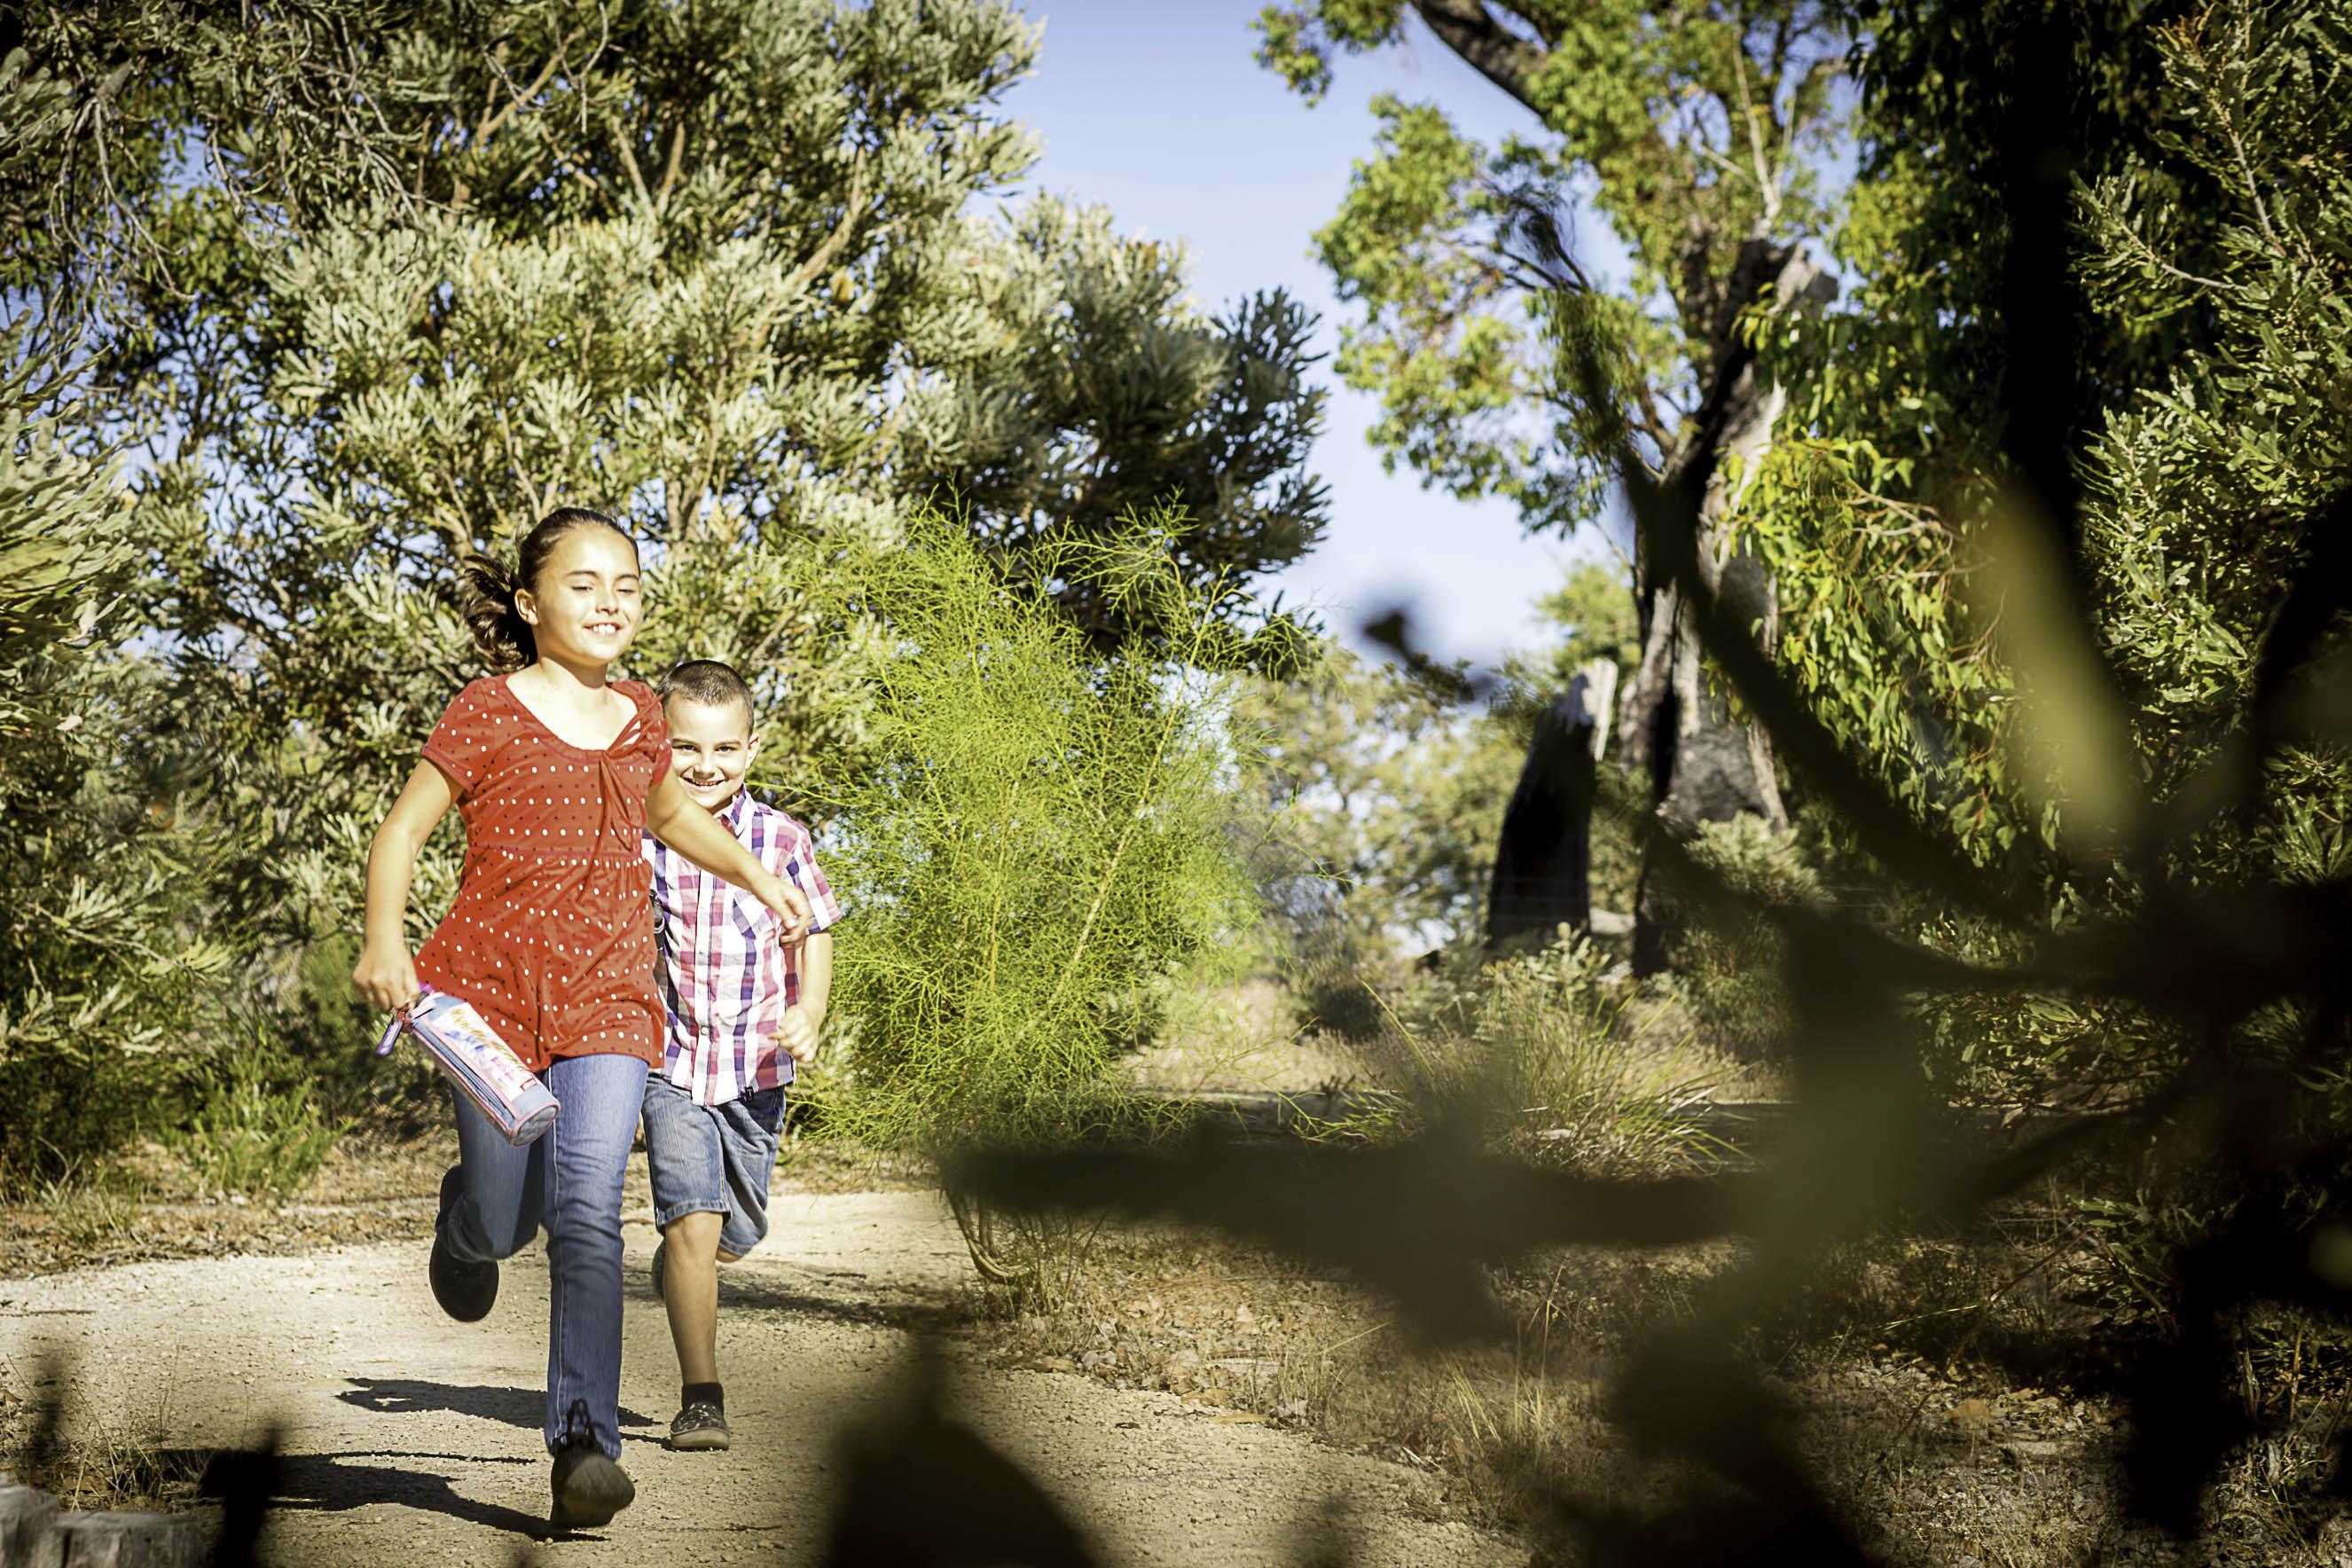 Explore the many pathways of the Children's Forest